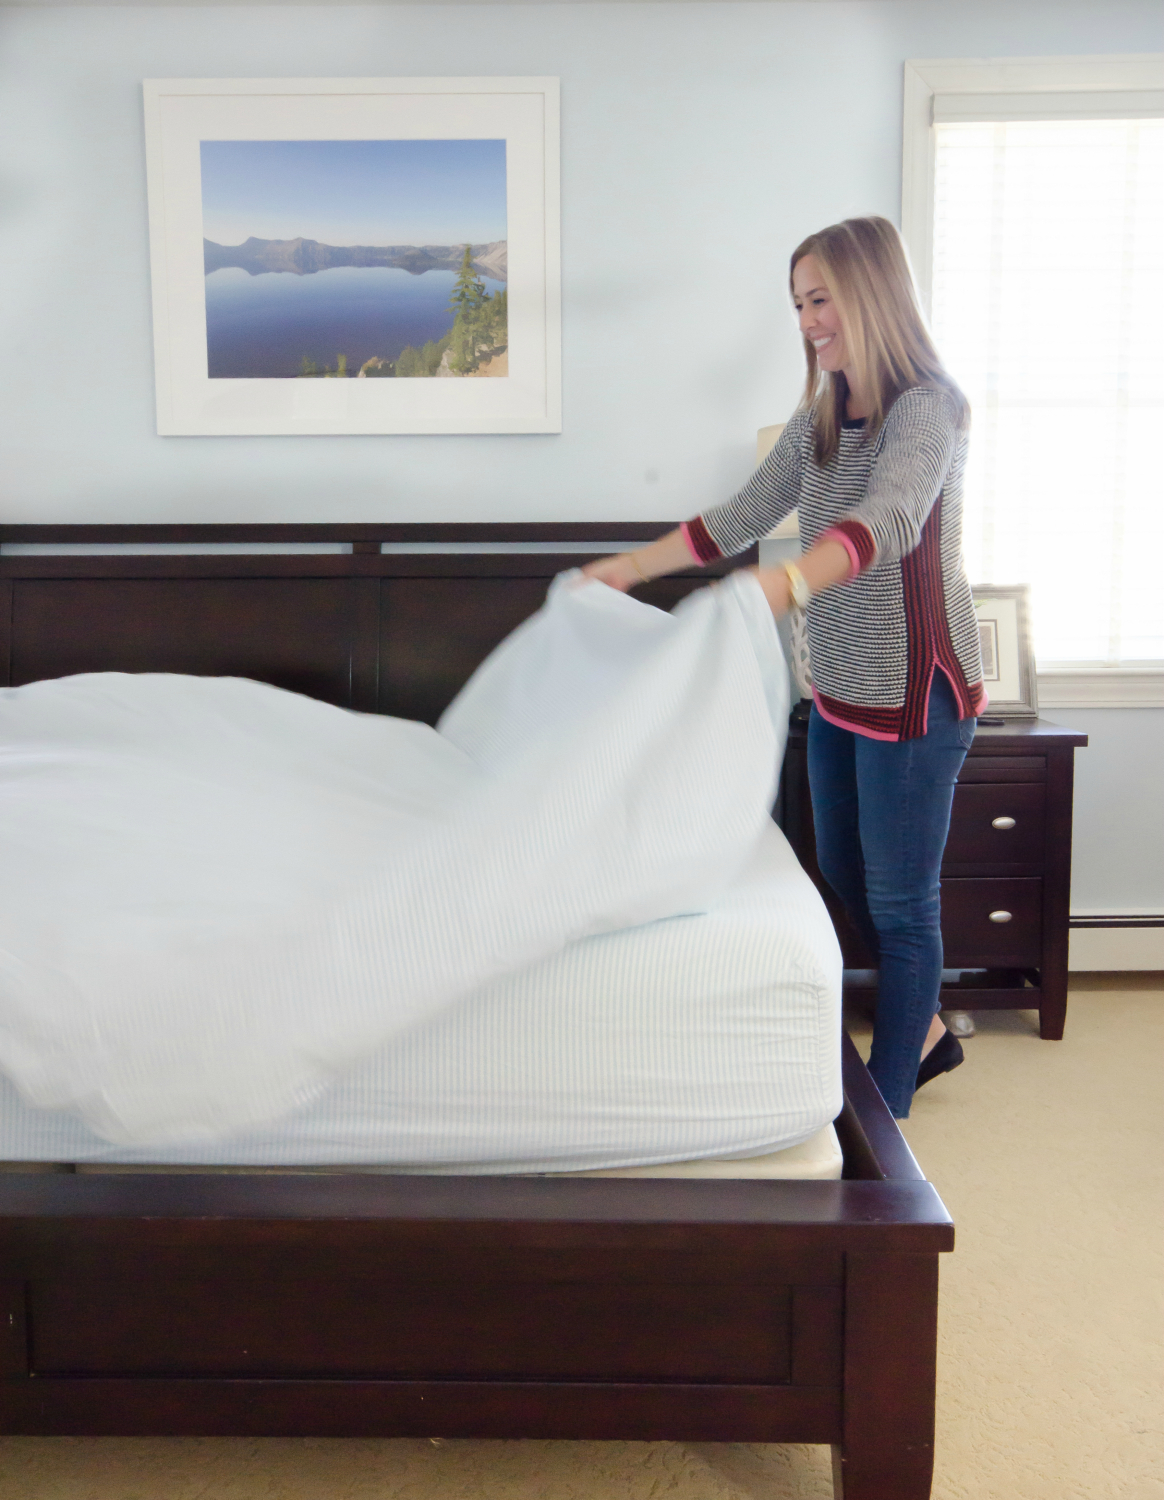 Bed in a box mattress review and why this one is risk free!